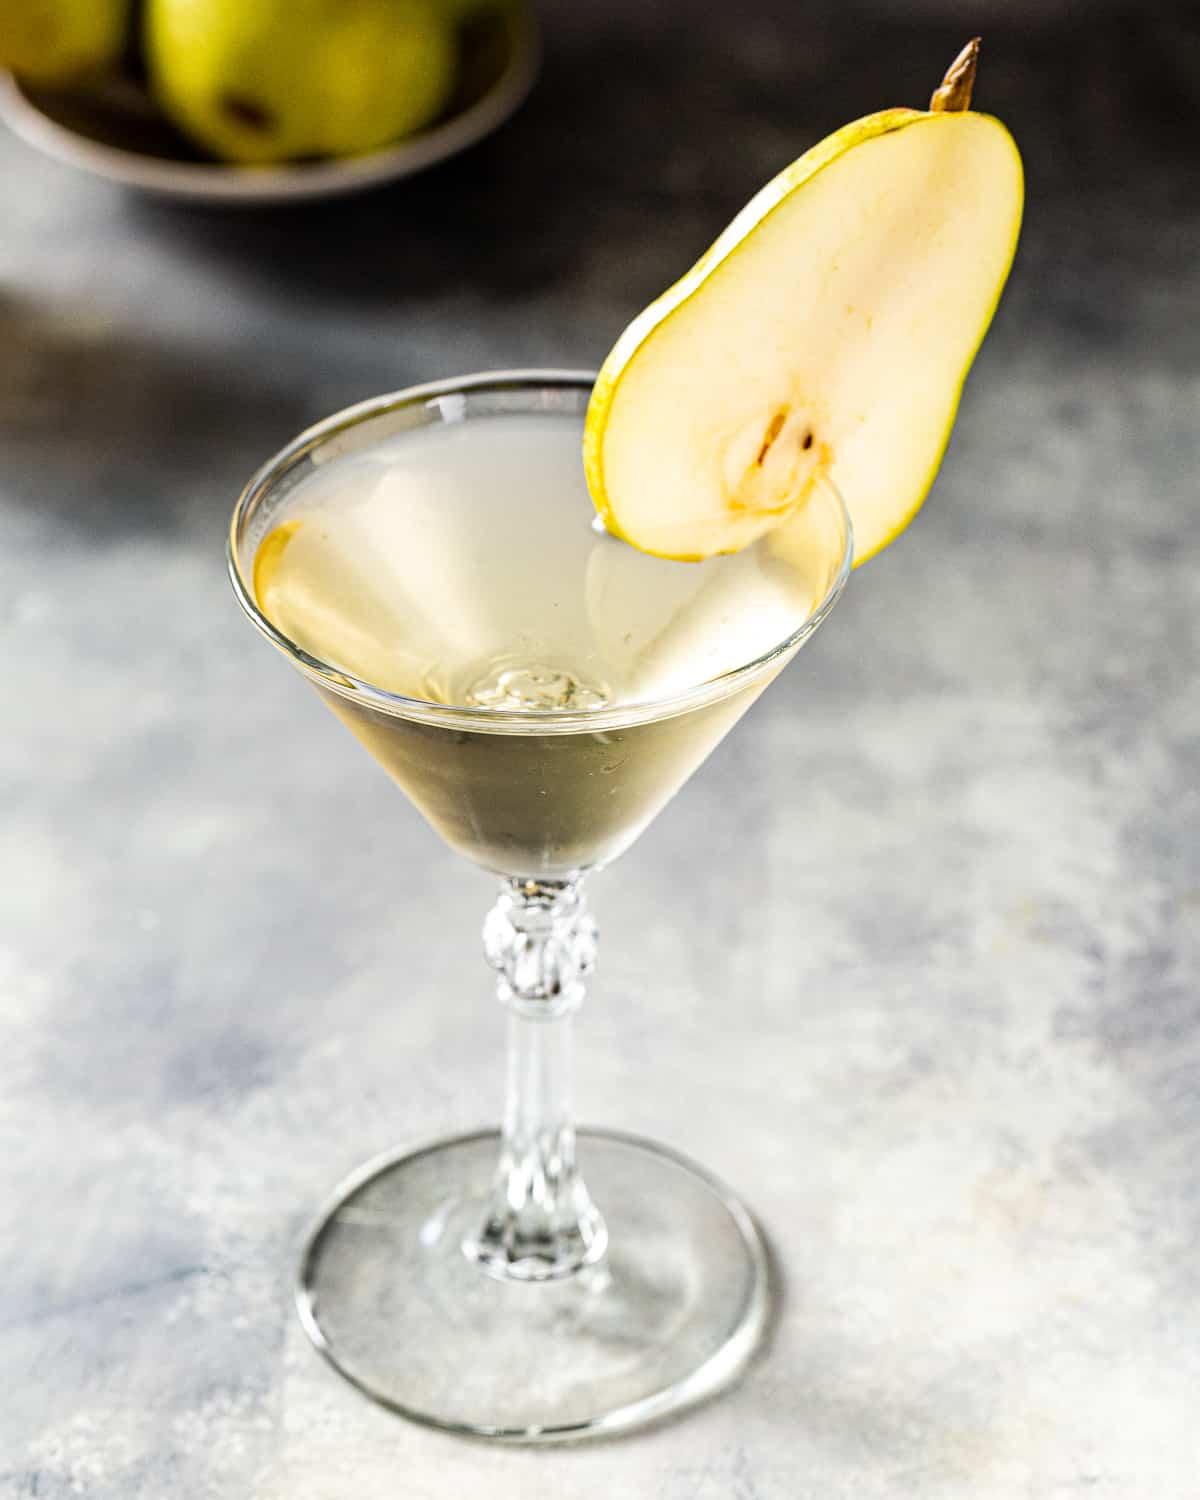 Overhead view of a Pear Martini in a stemmed martini glass with a fresh pear garnish. At the top left of the frame are a couple of fresh pears.